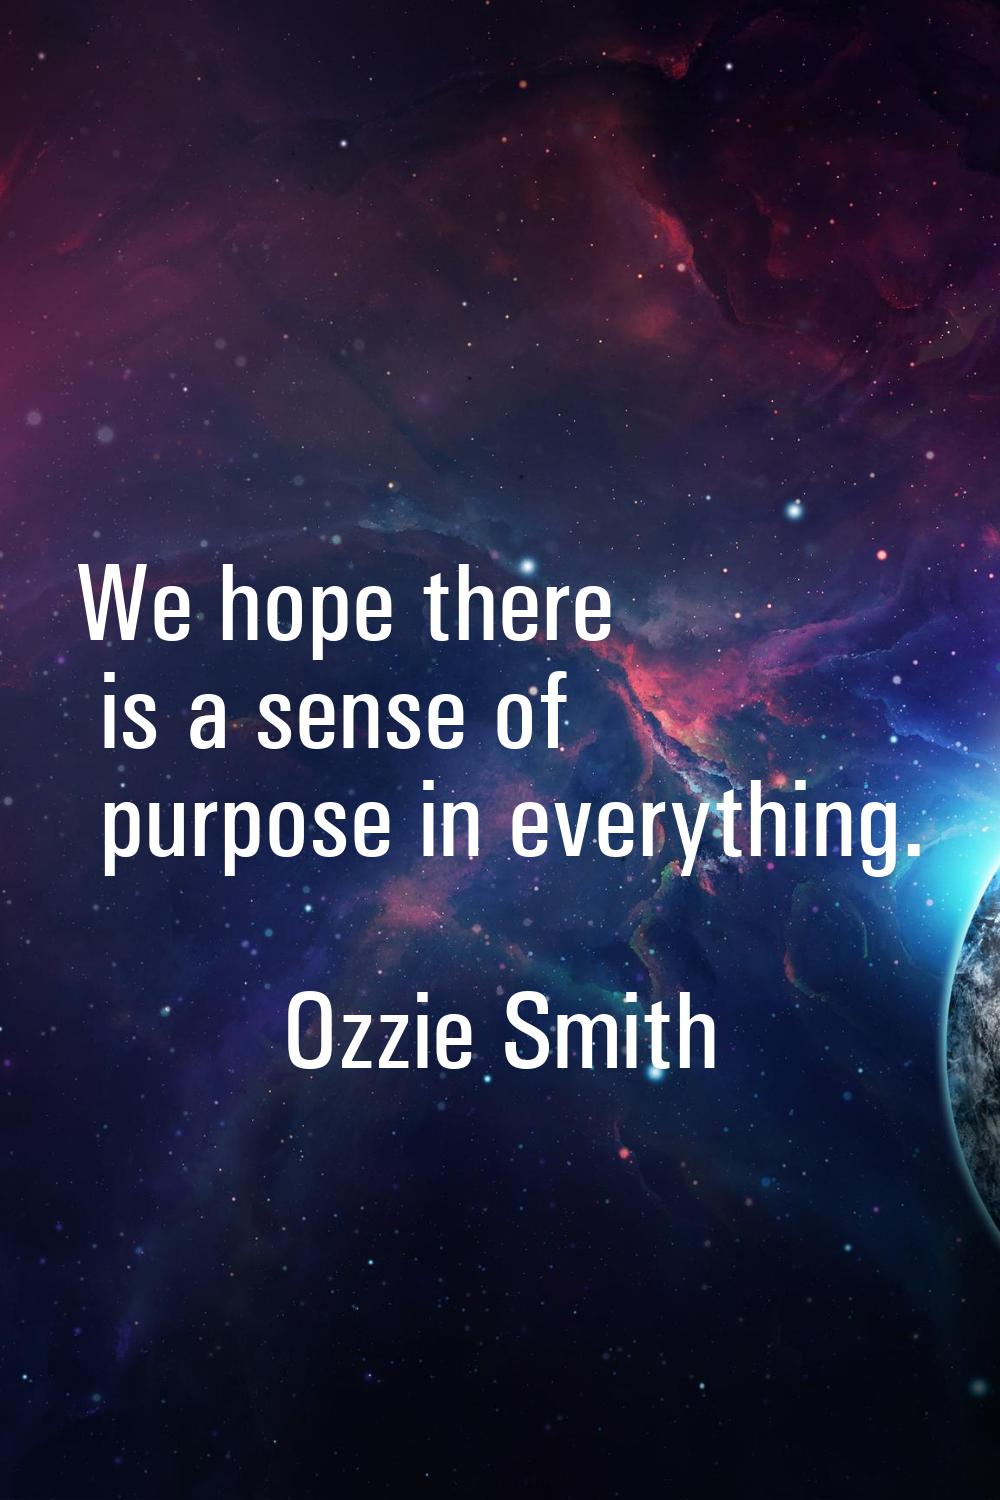 We hope there is a sense of purpose in everything.